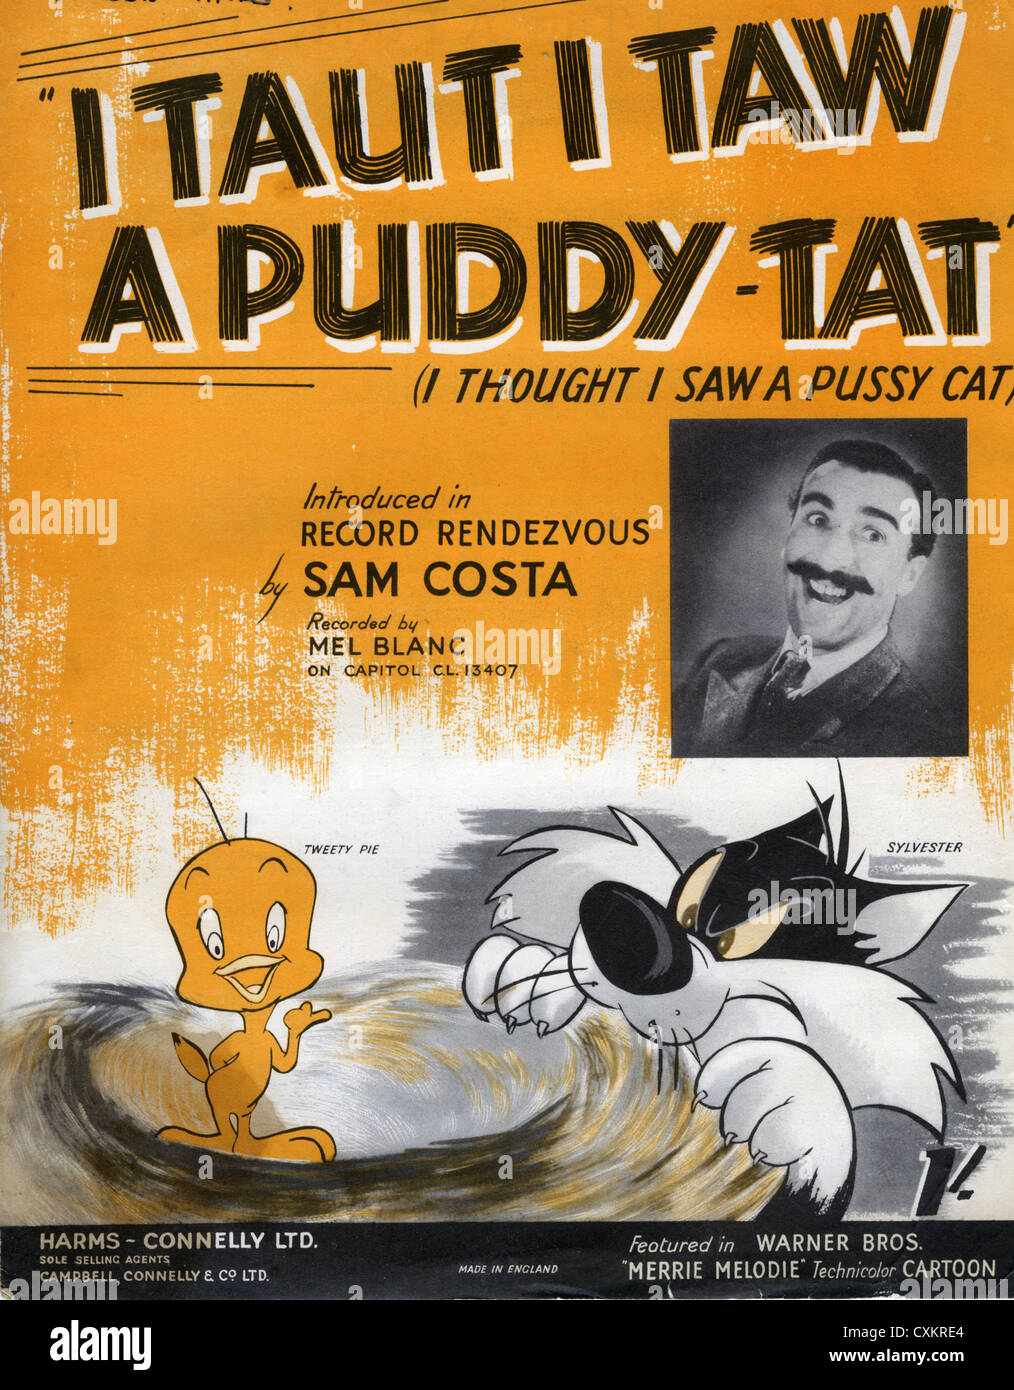 I TAUT I TAW A PUDDY TAT Sheet music for song composed in 1950 recorded by Mel Blanc as played on BBC radio by Sam Costa Stock Photo